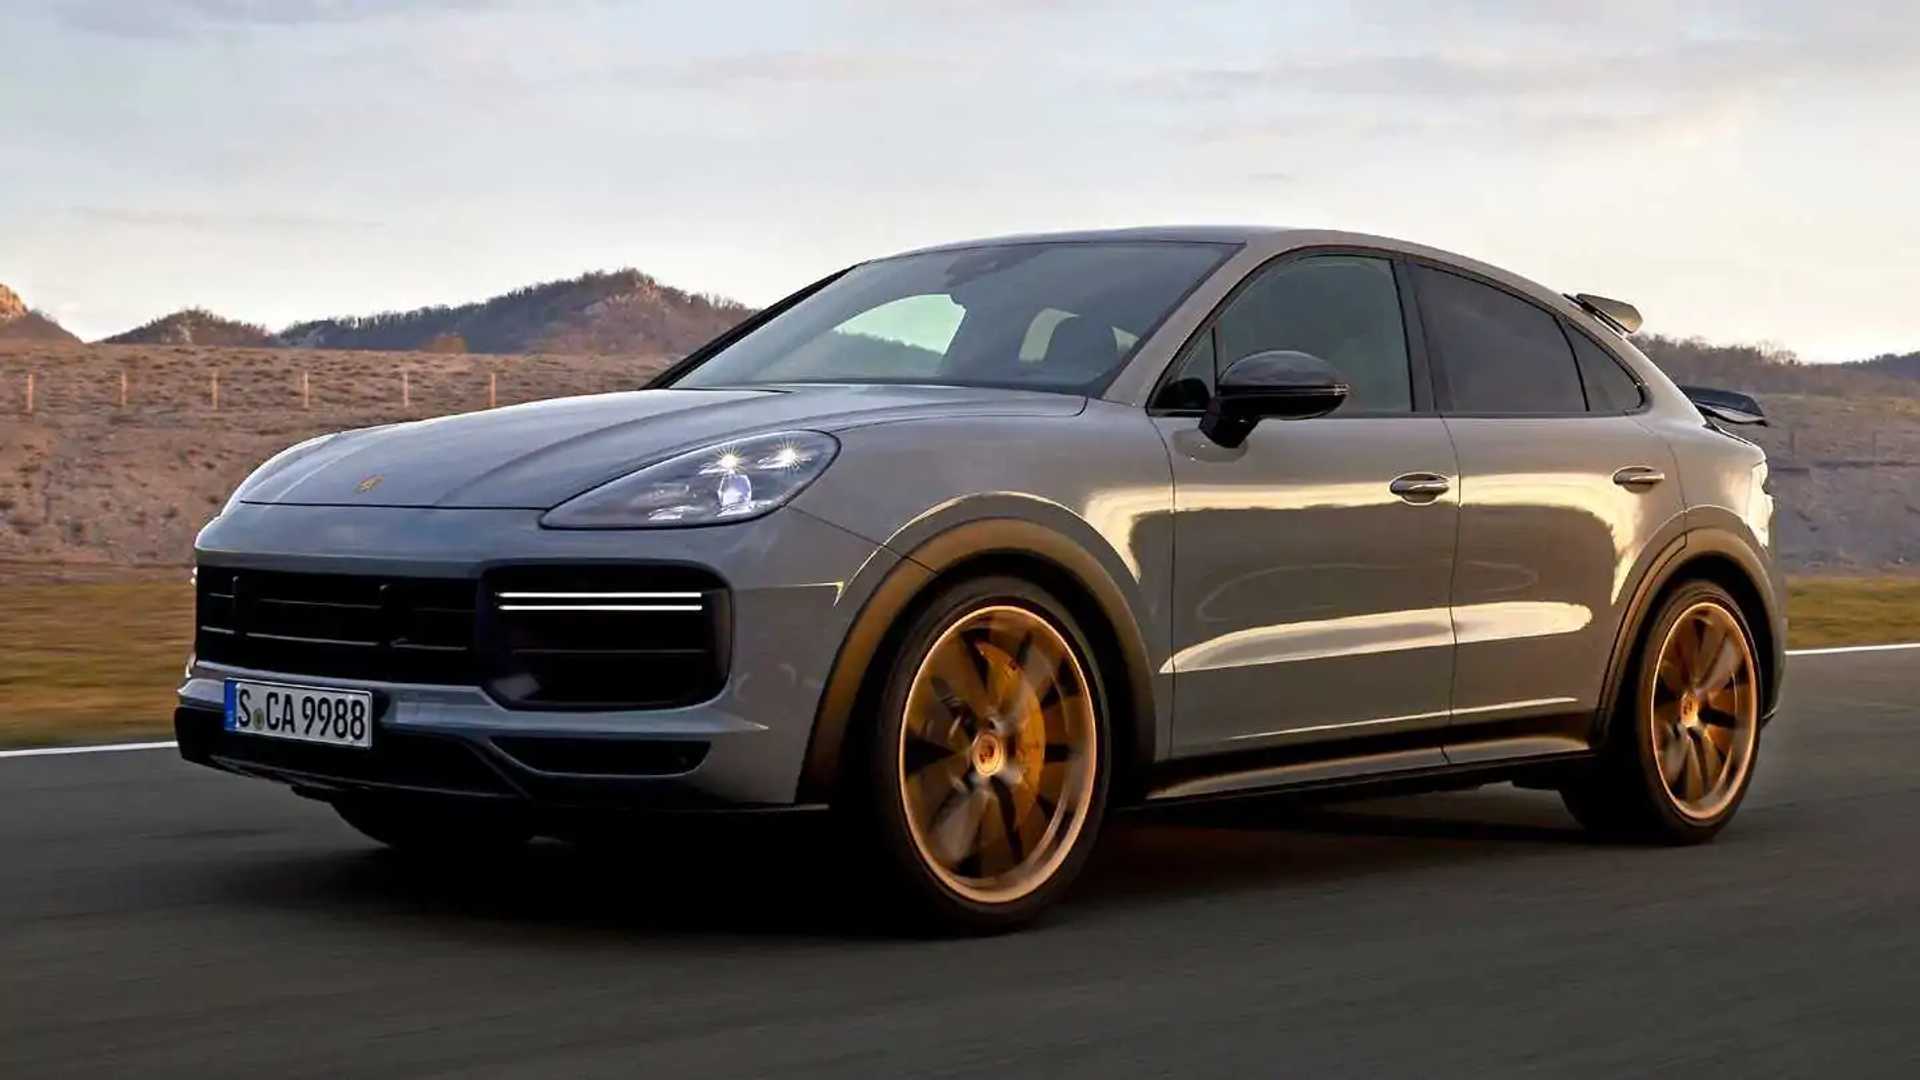 Porsche Cayenne Turbo GT Debuts With 631 HP, Hits 60 MPH In 3.1 Seconds